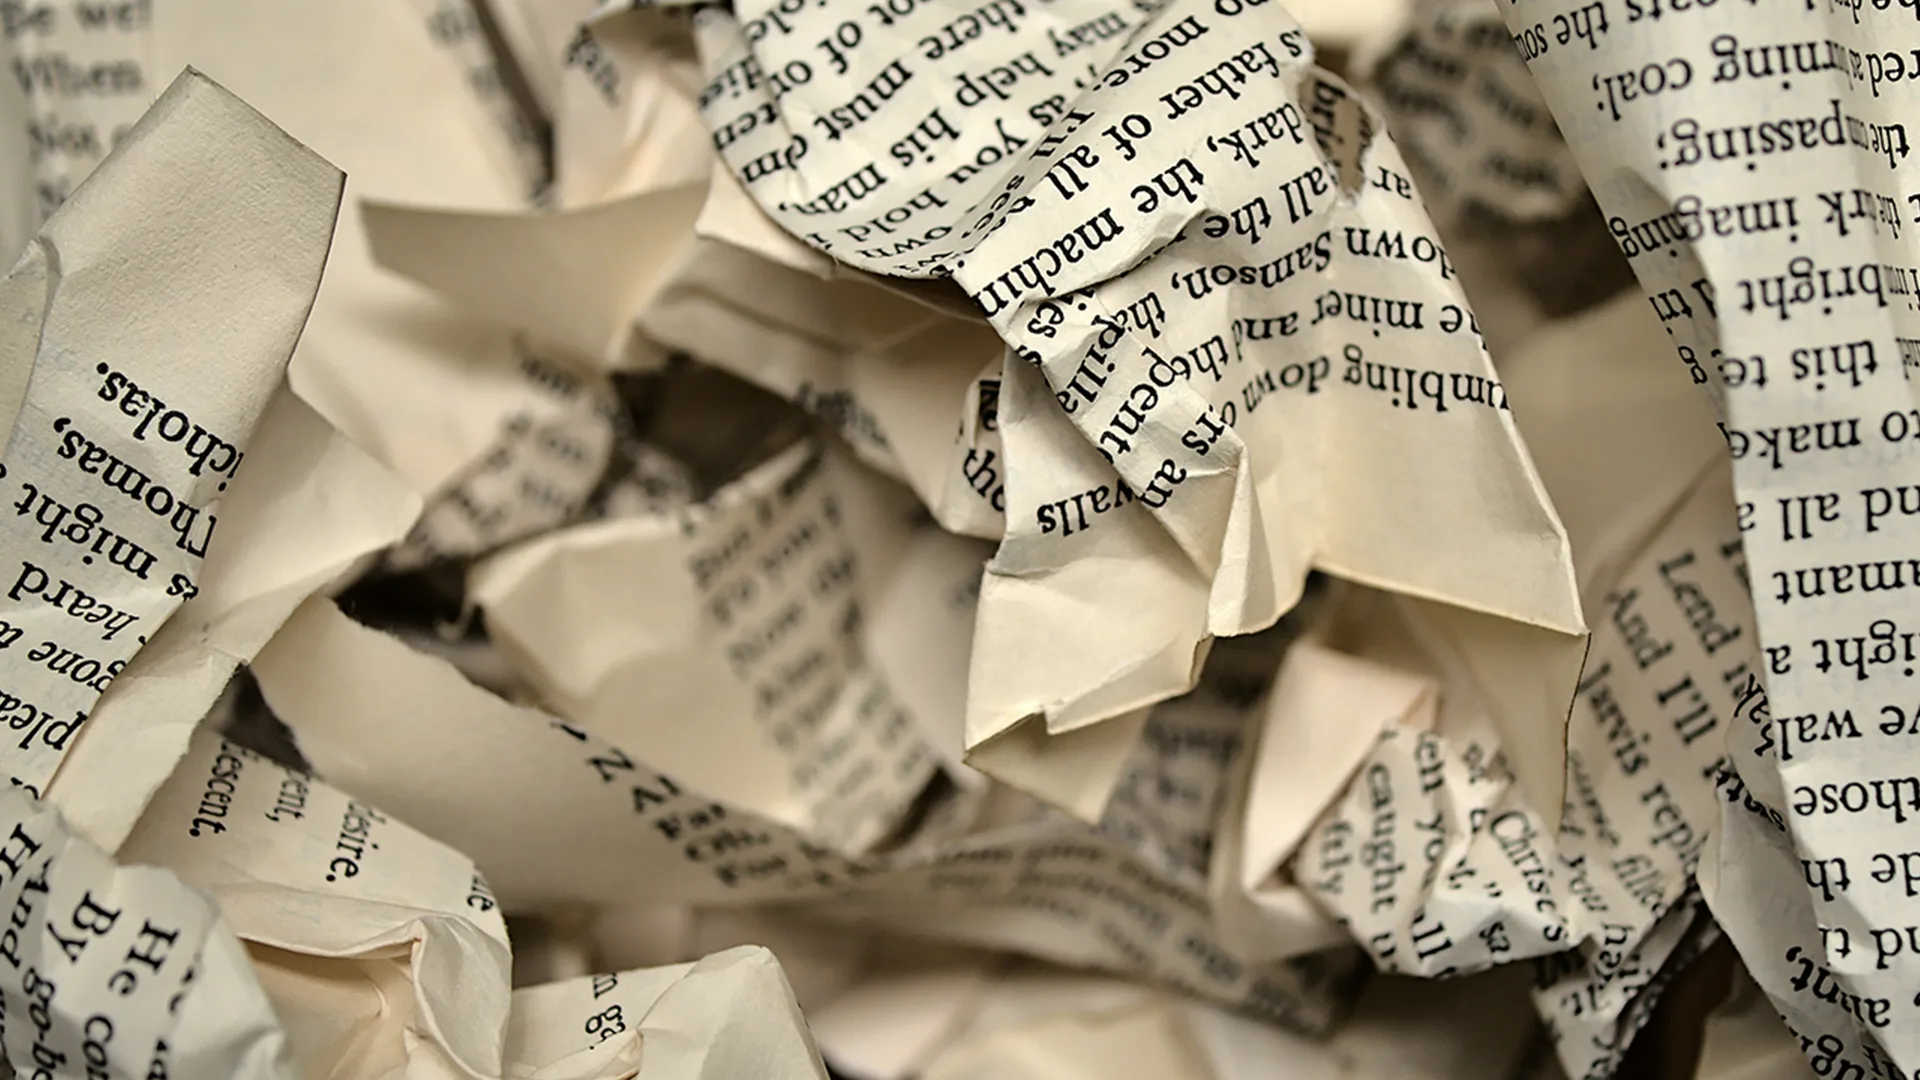 Crumpled up pages from a book